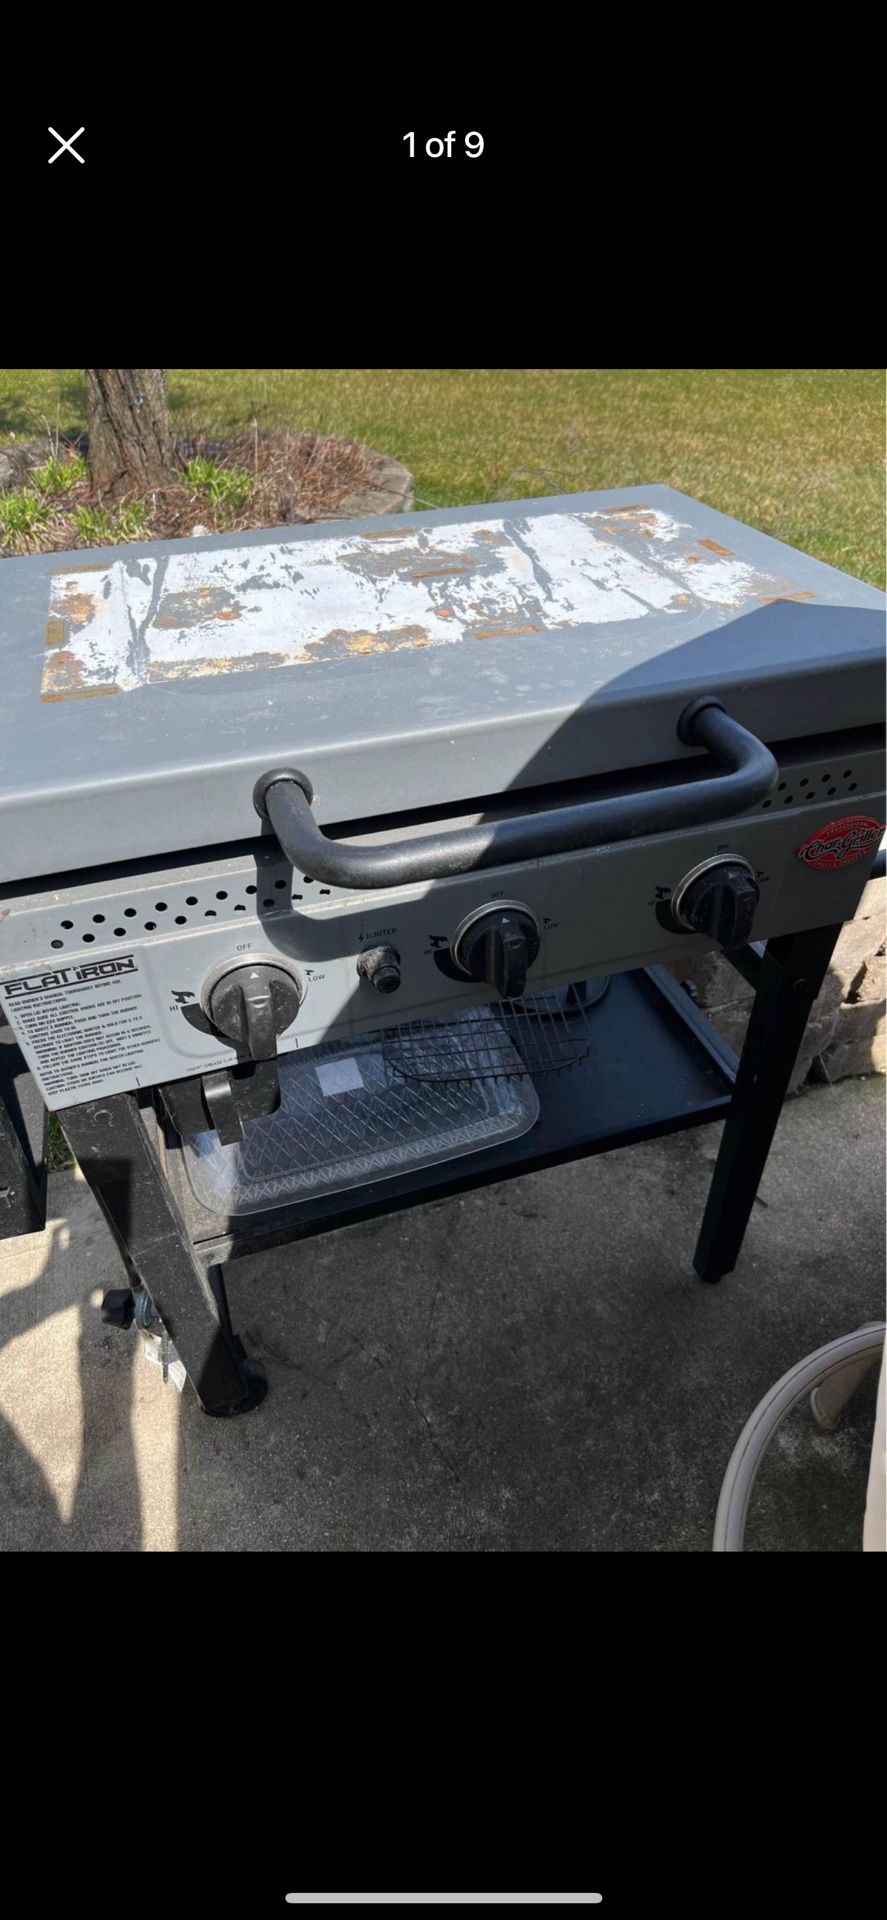 professional char giller and smoker flat top grill propane, gas grill